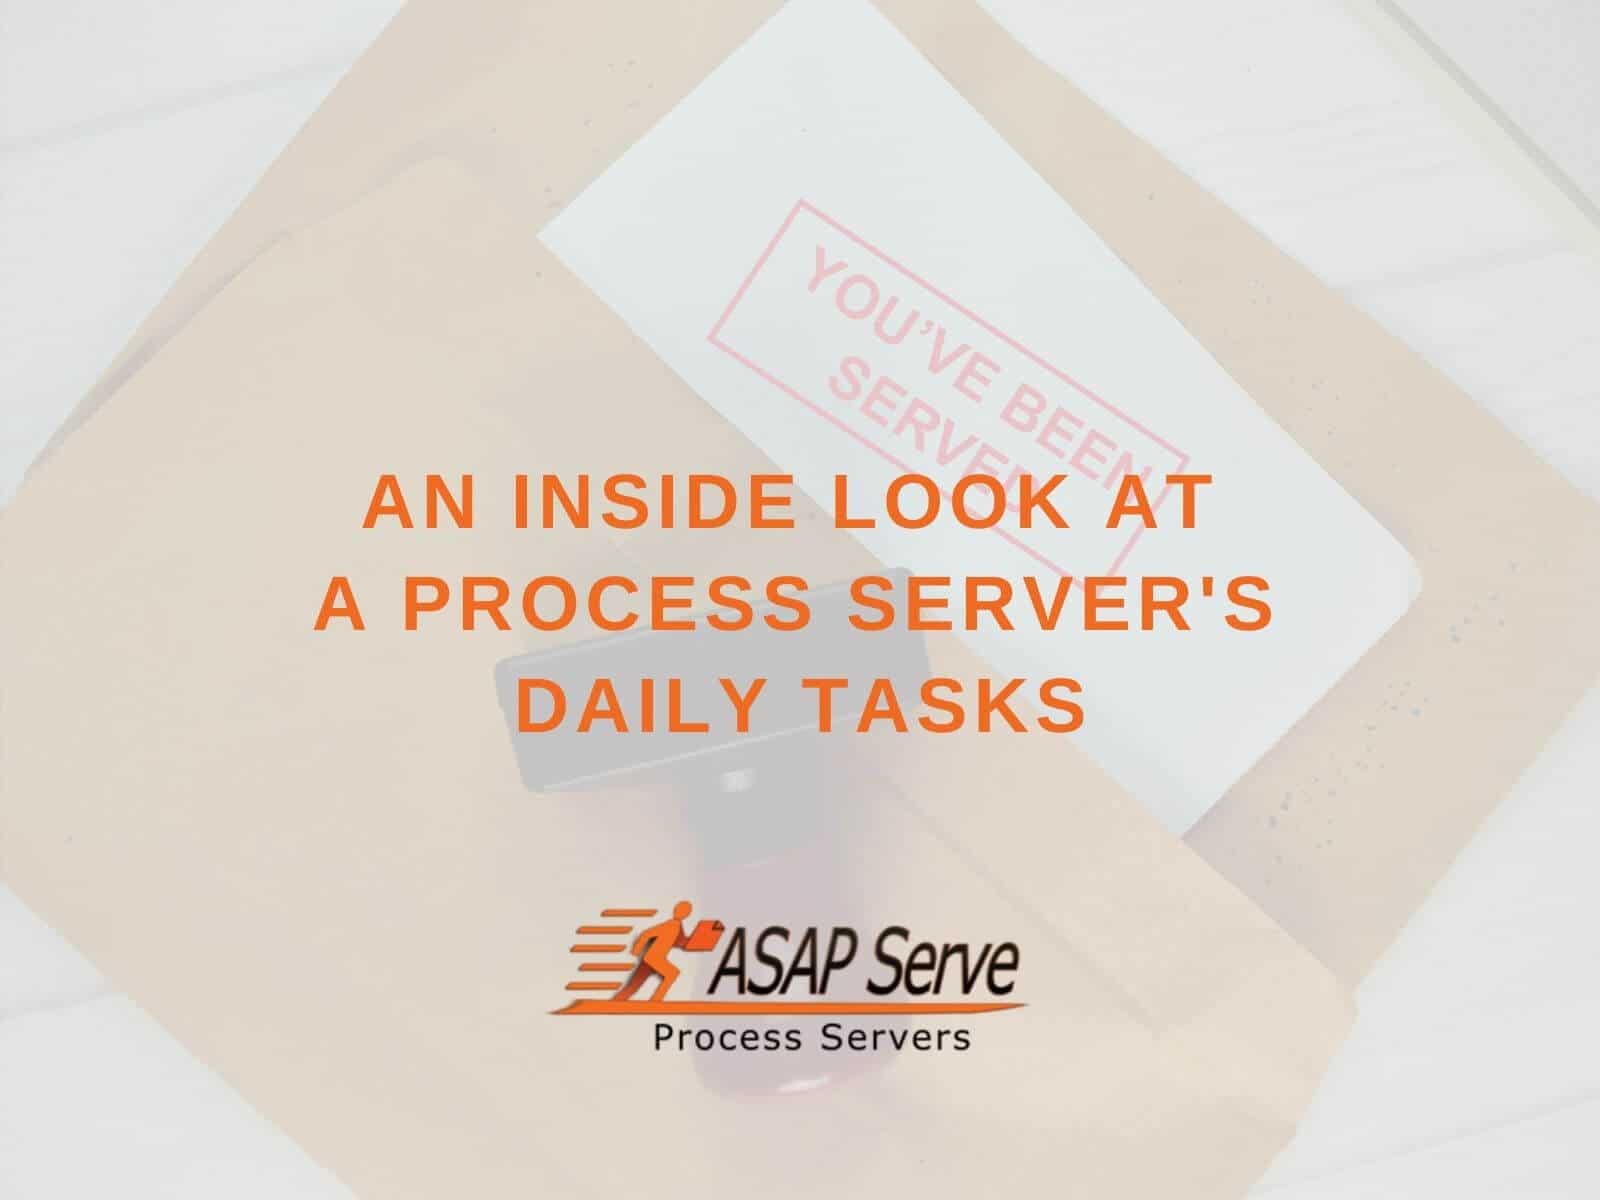 An Inside Look at a Process Server's Daily Tasks